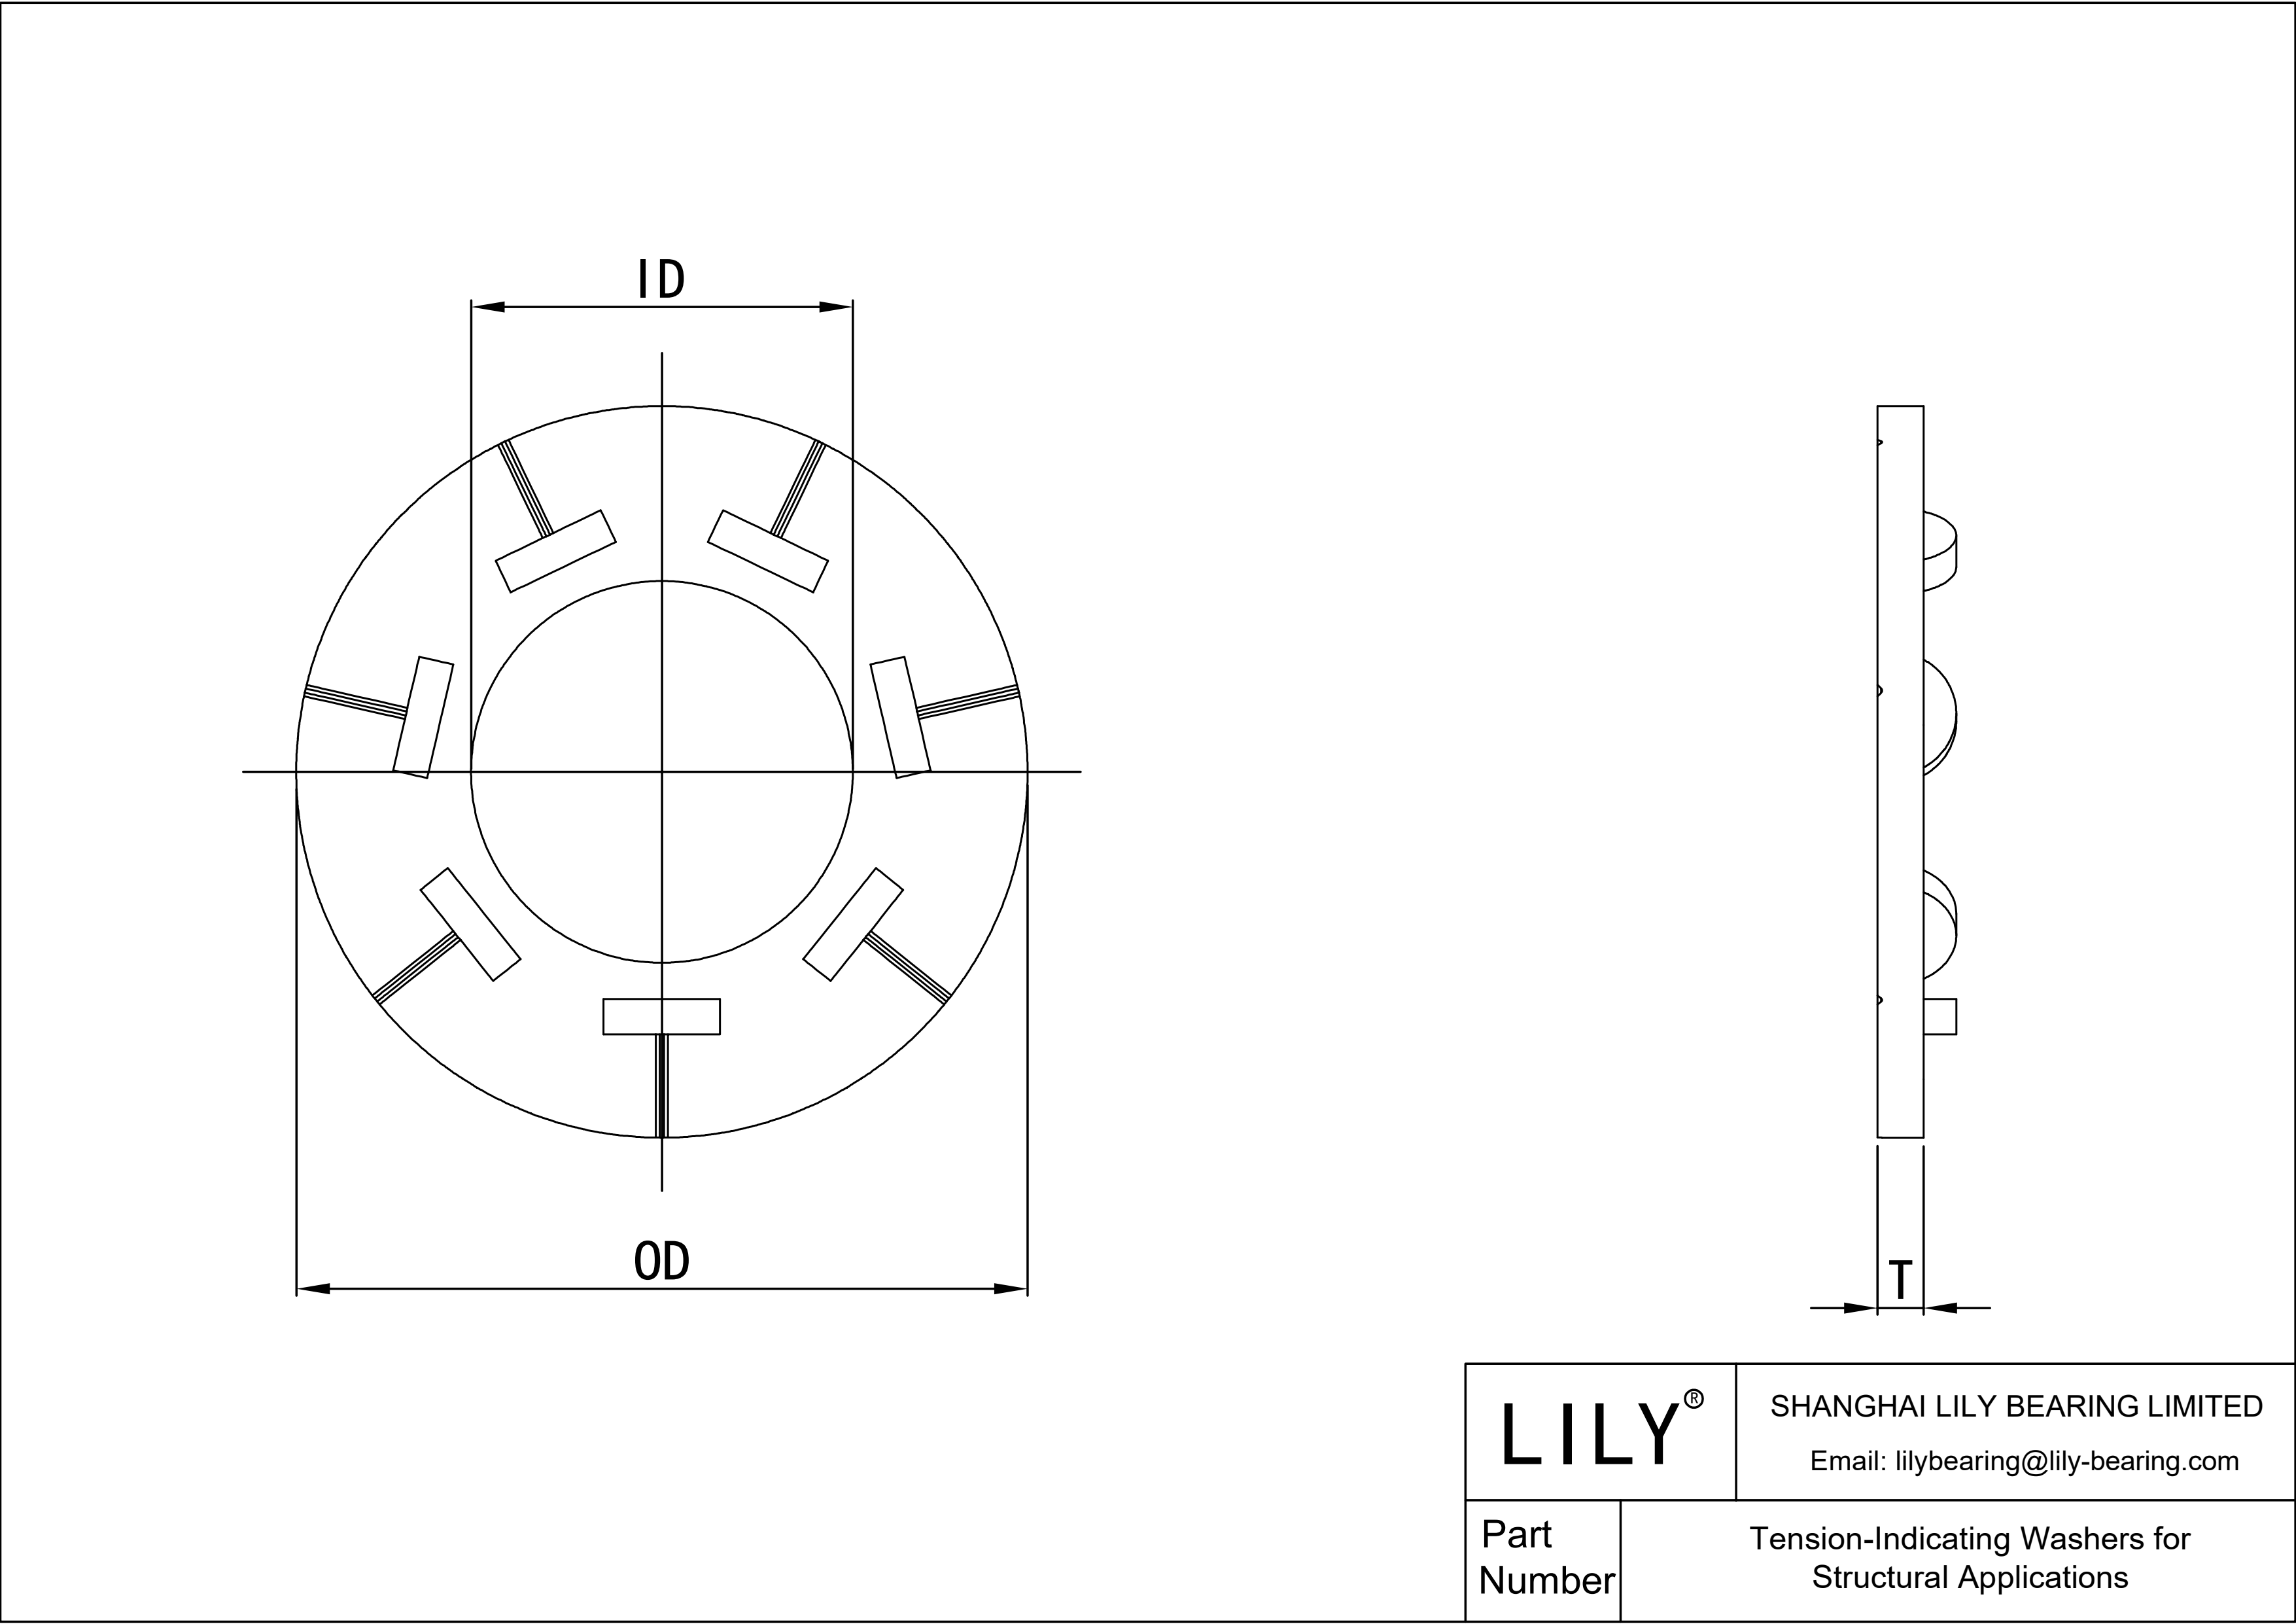 JBDFIAFAB Tension-Indicating Washers for Structural Applications cad drawing